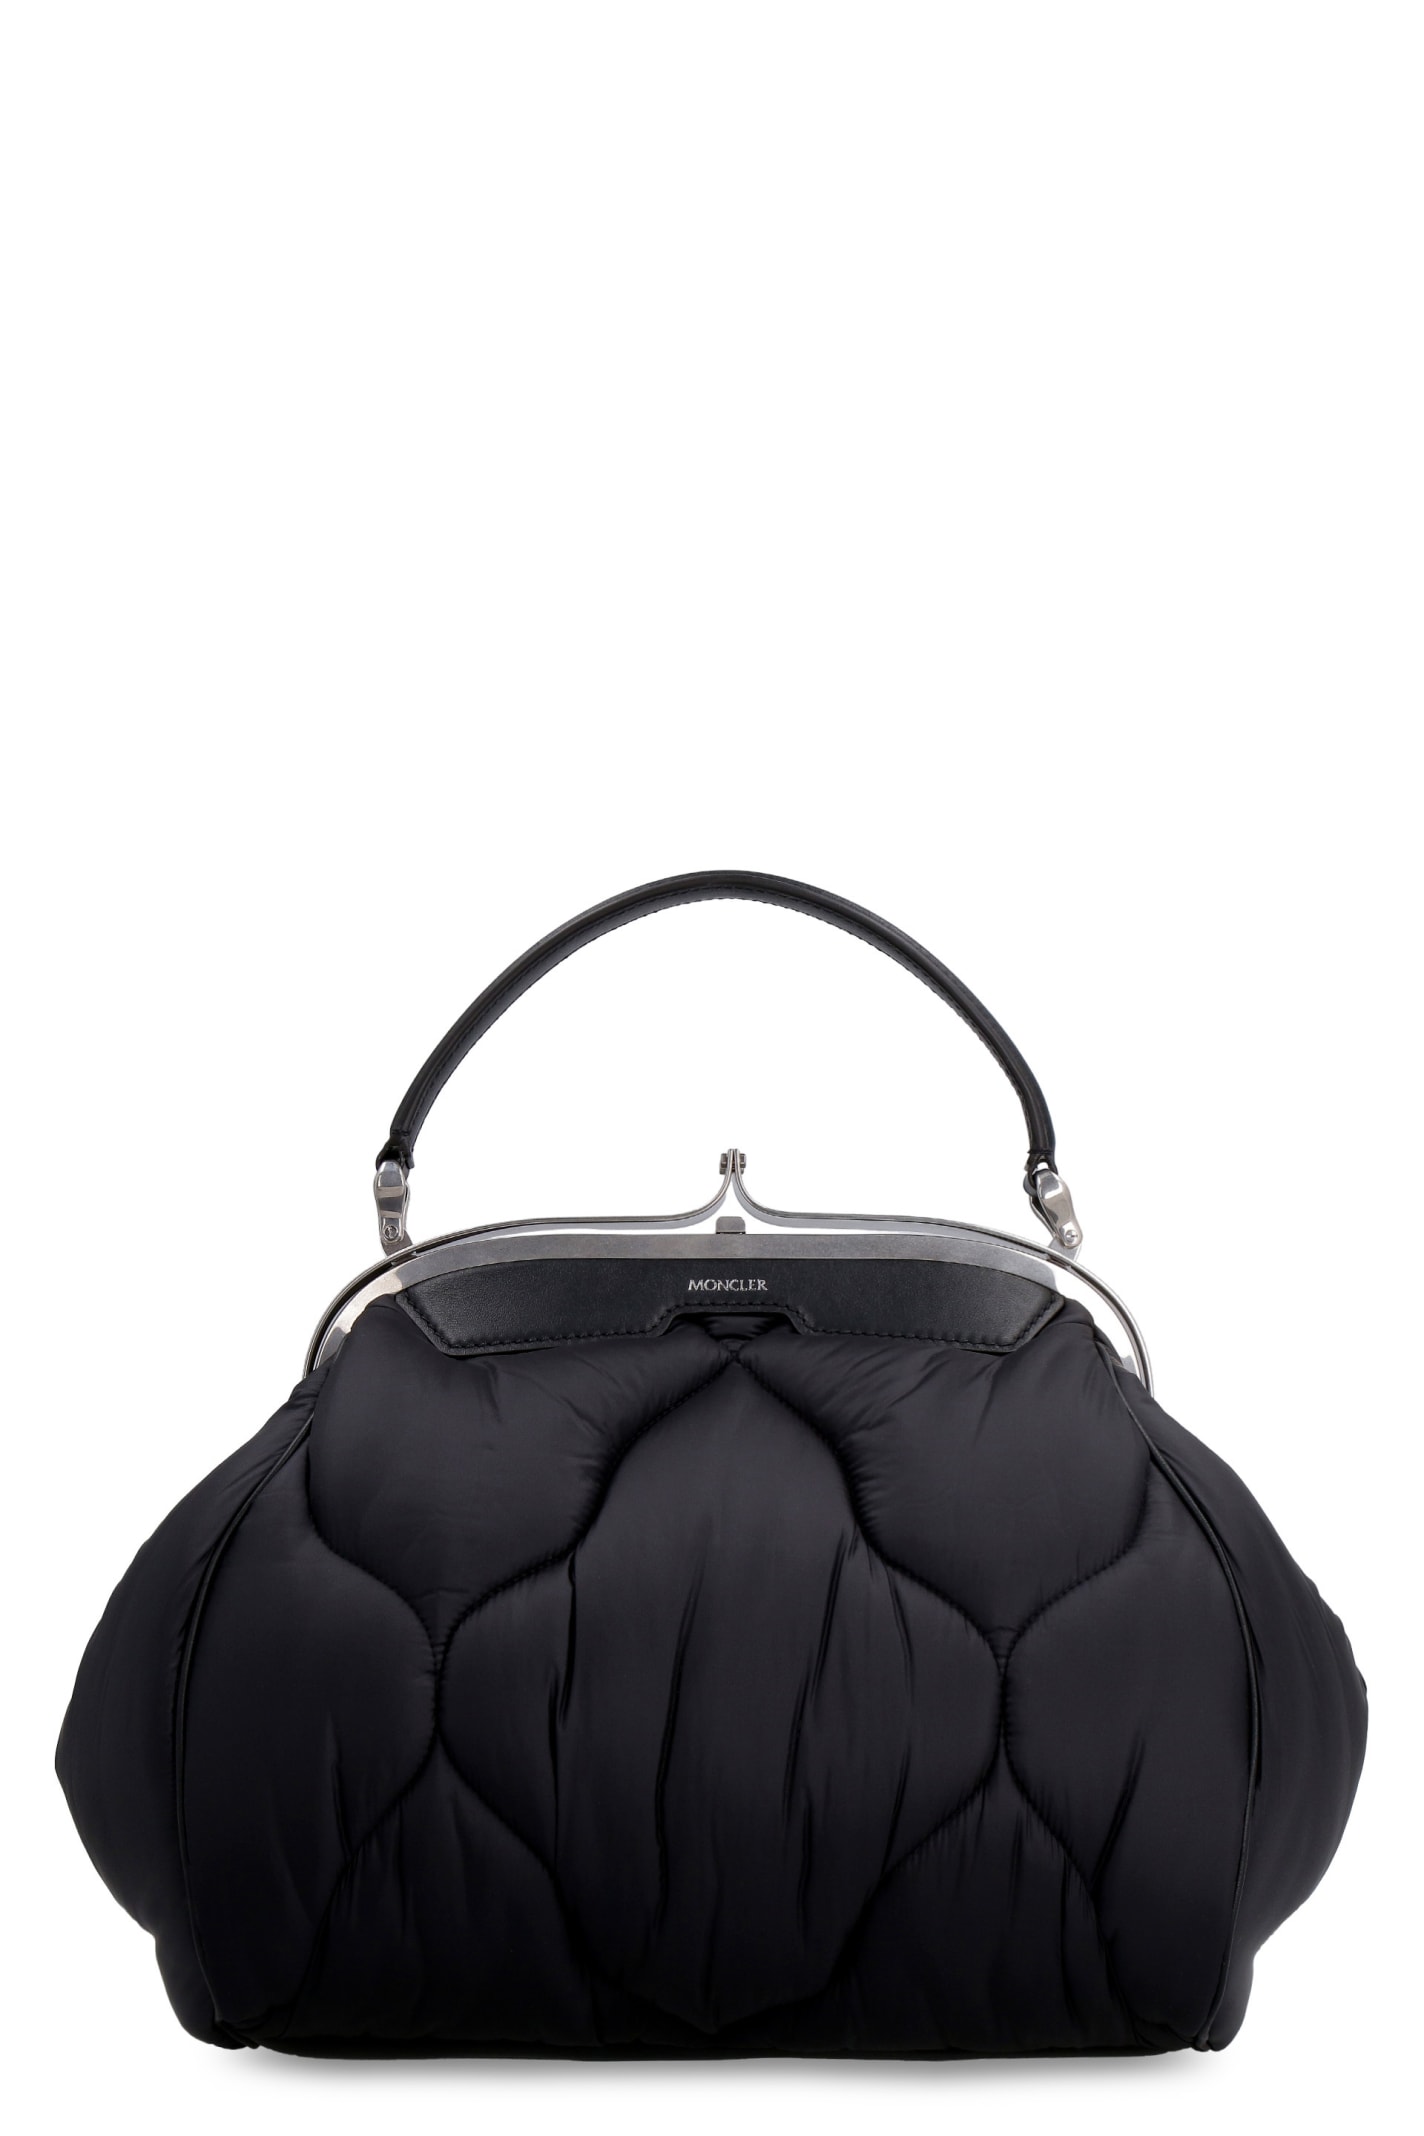 Moncler Genius 2 Moncler 1952 - Plompe Nylon And Leather Bag